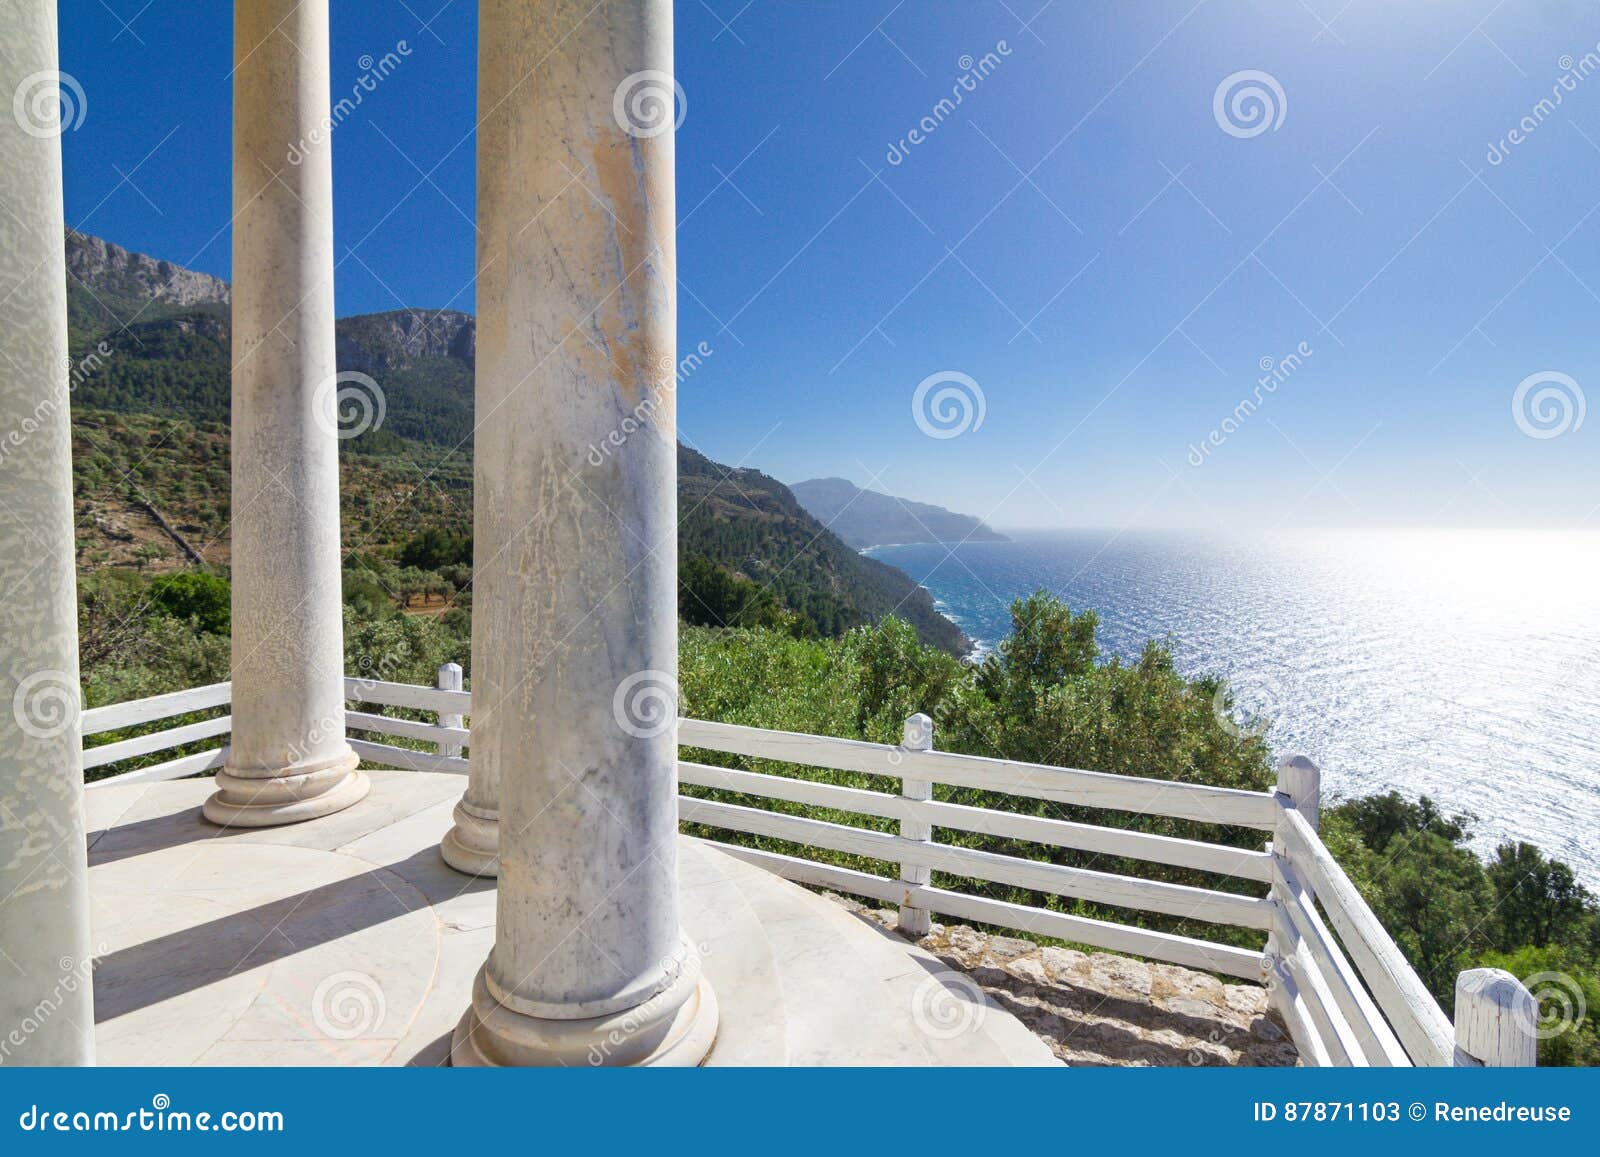 famous viewpoint from son marroig over the blue mediterranean sea.